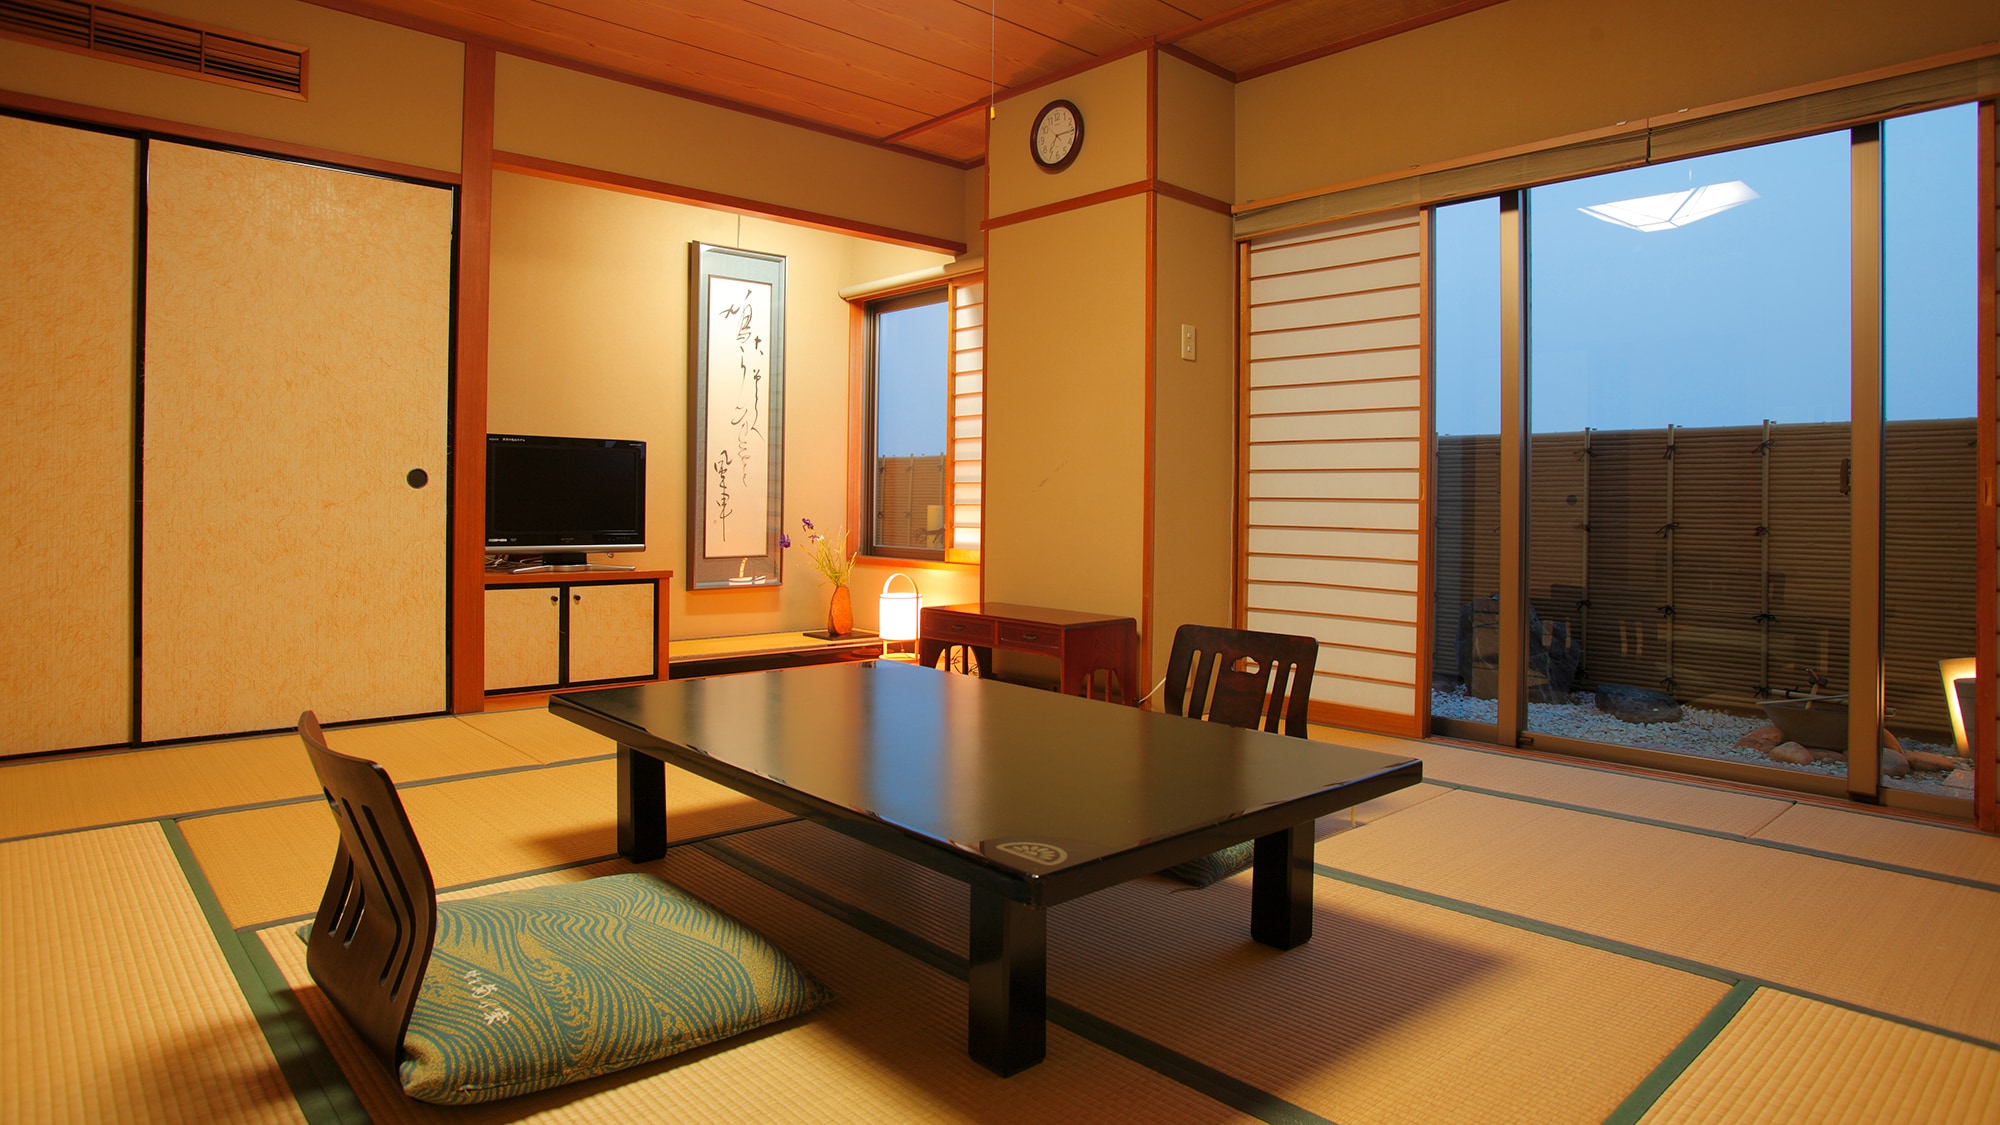 Town side Japanese-style room 10 tatami mats